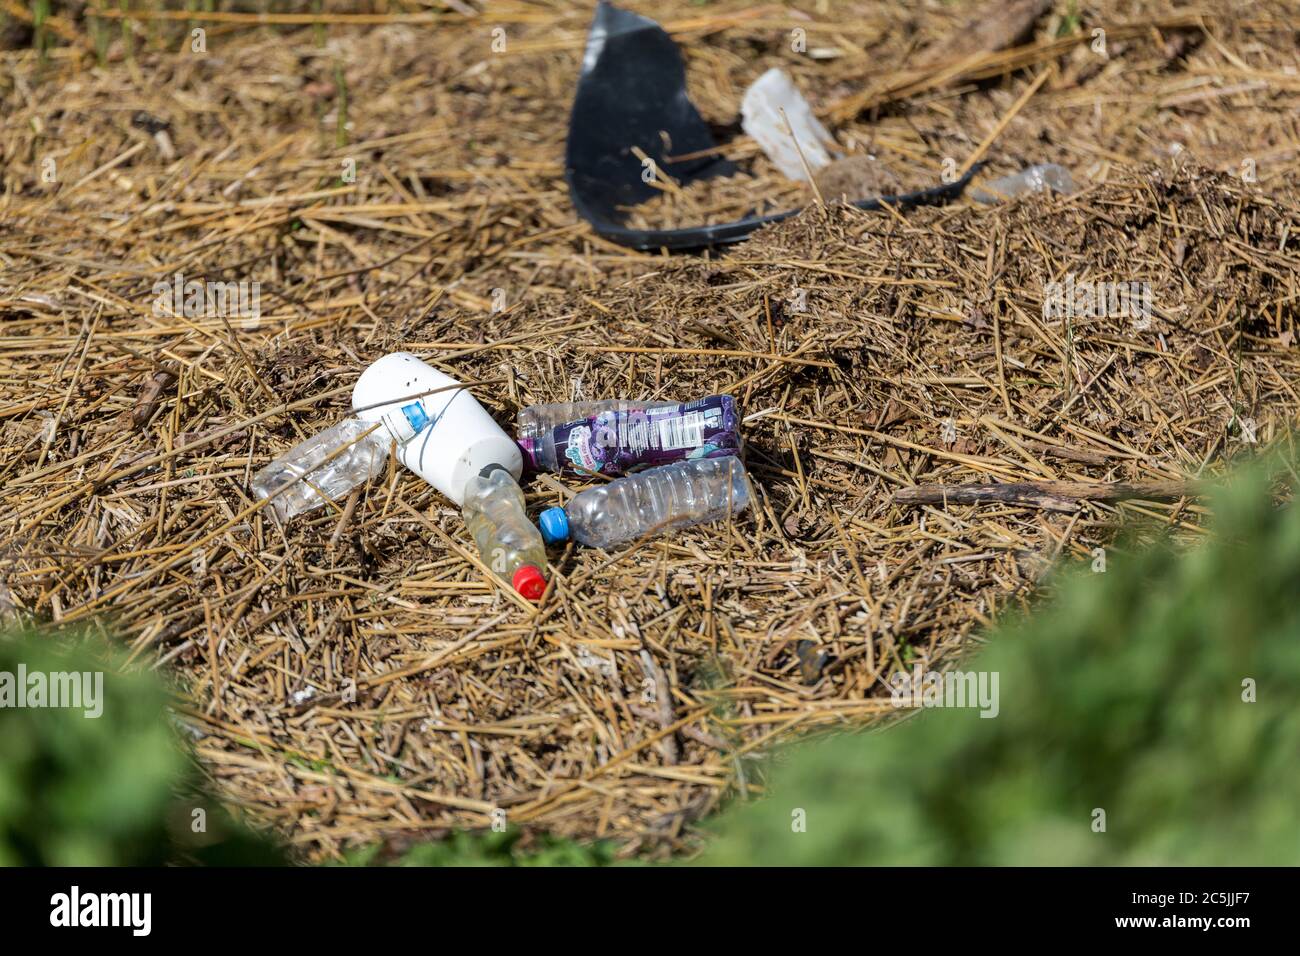 Suffolk, UK April 15 2020: washed up garbage on a river bank. Empty used dirty plastic bottles. Environmental pollution. Ecological problem Stock Photo